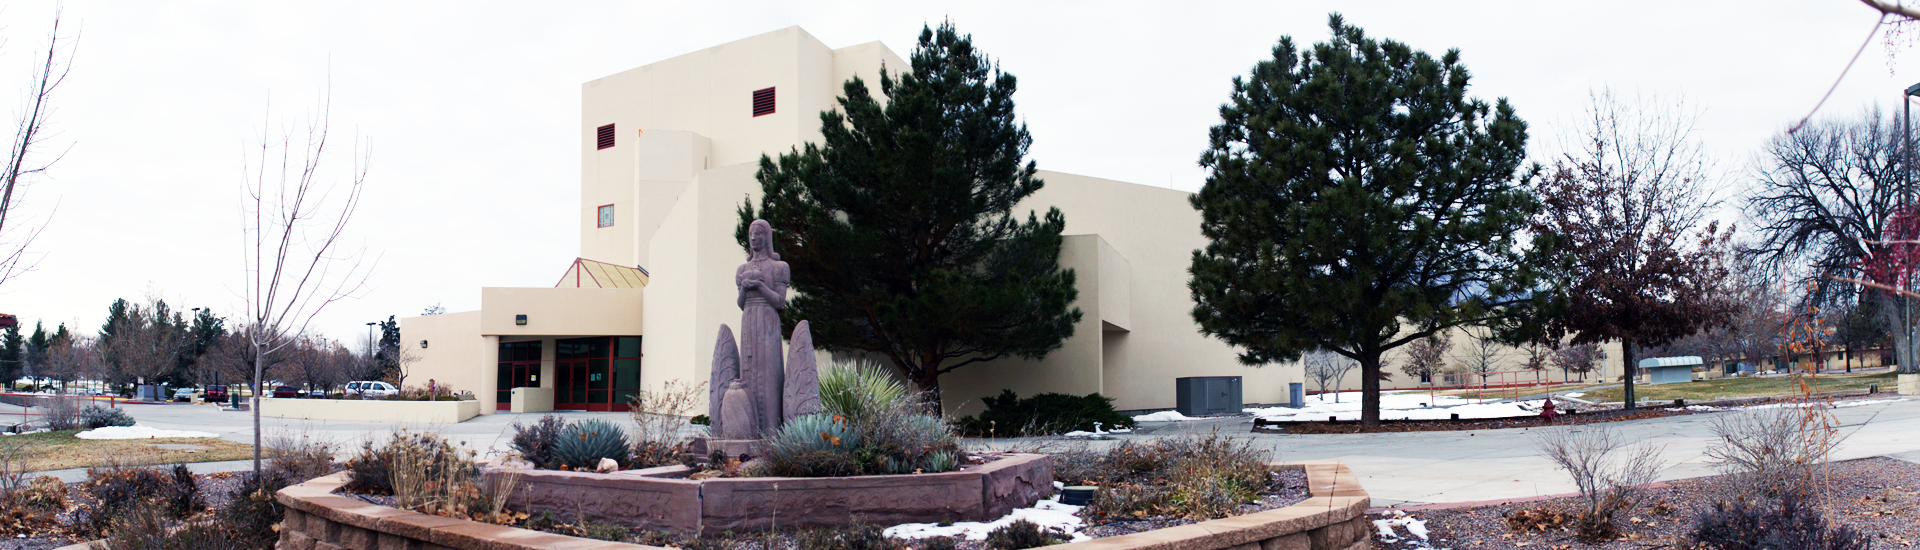 Workman Building at New Mexico Tech